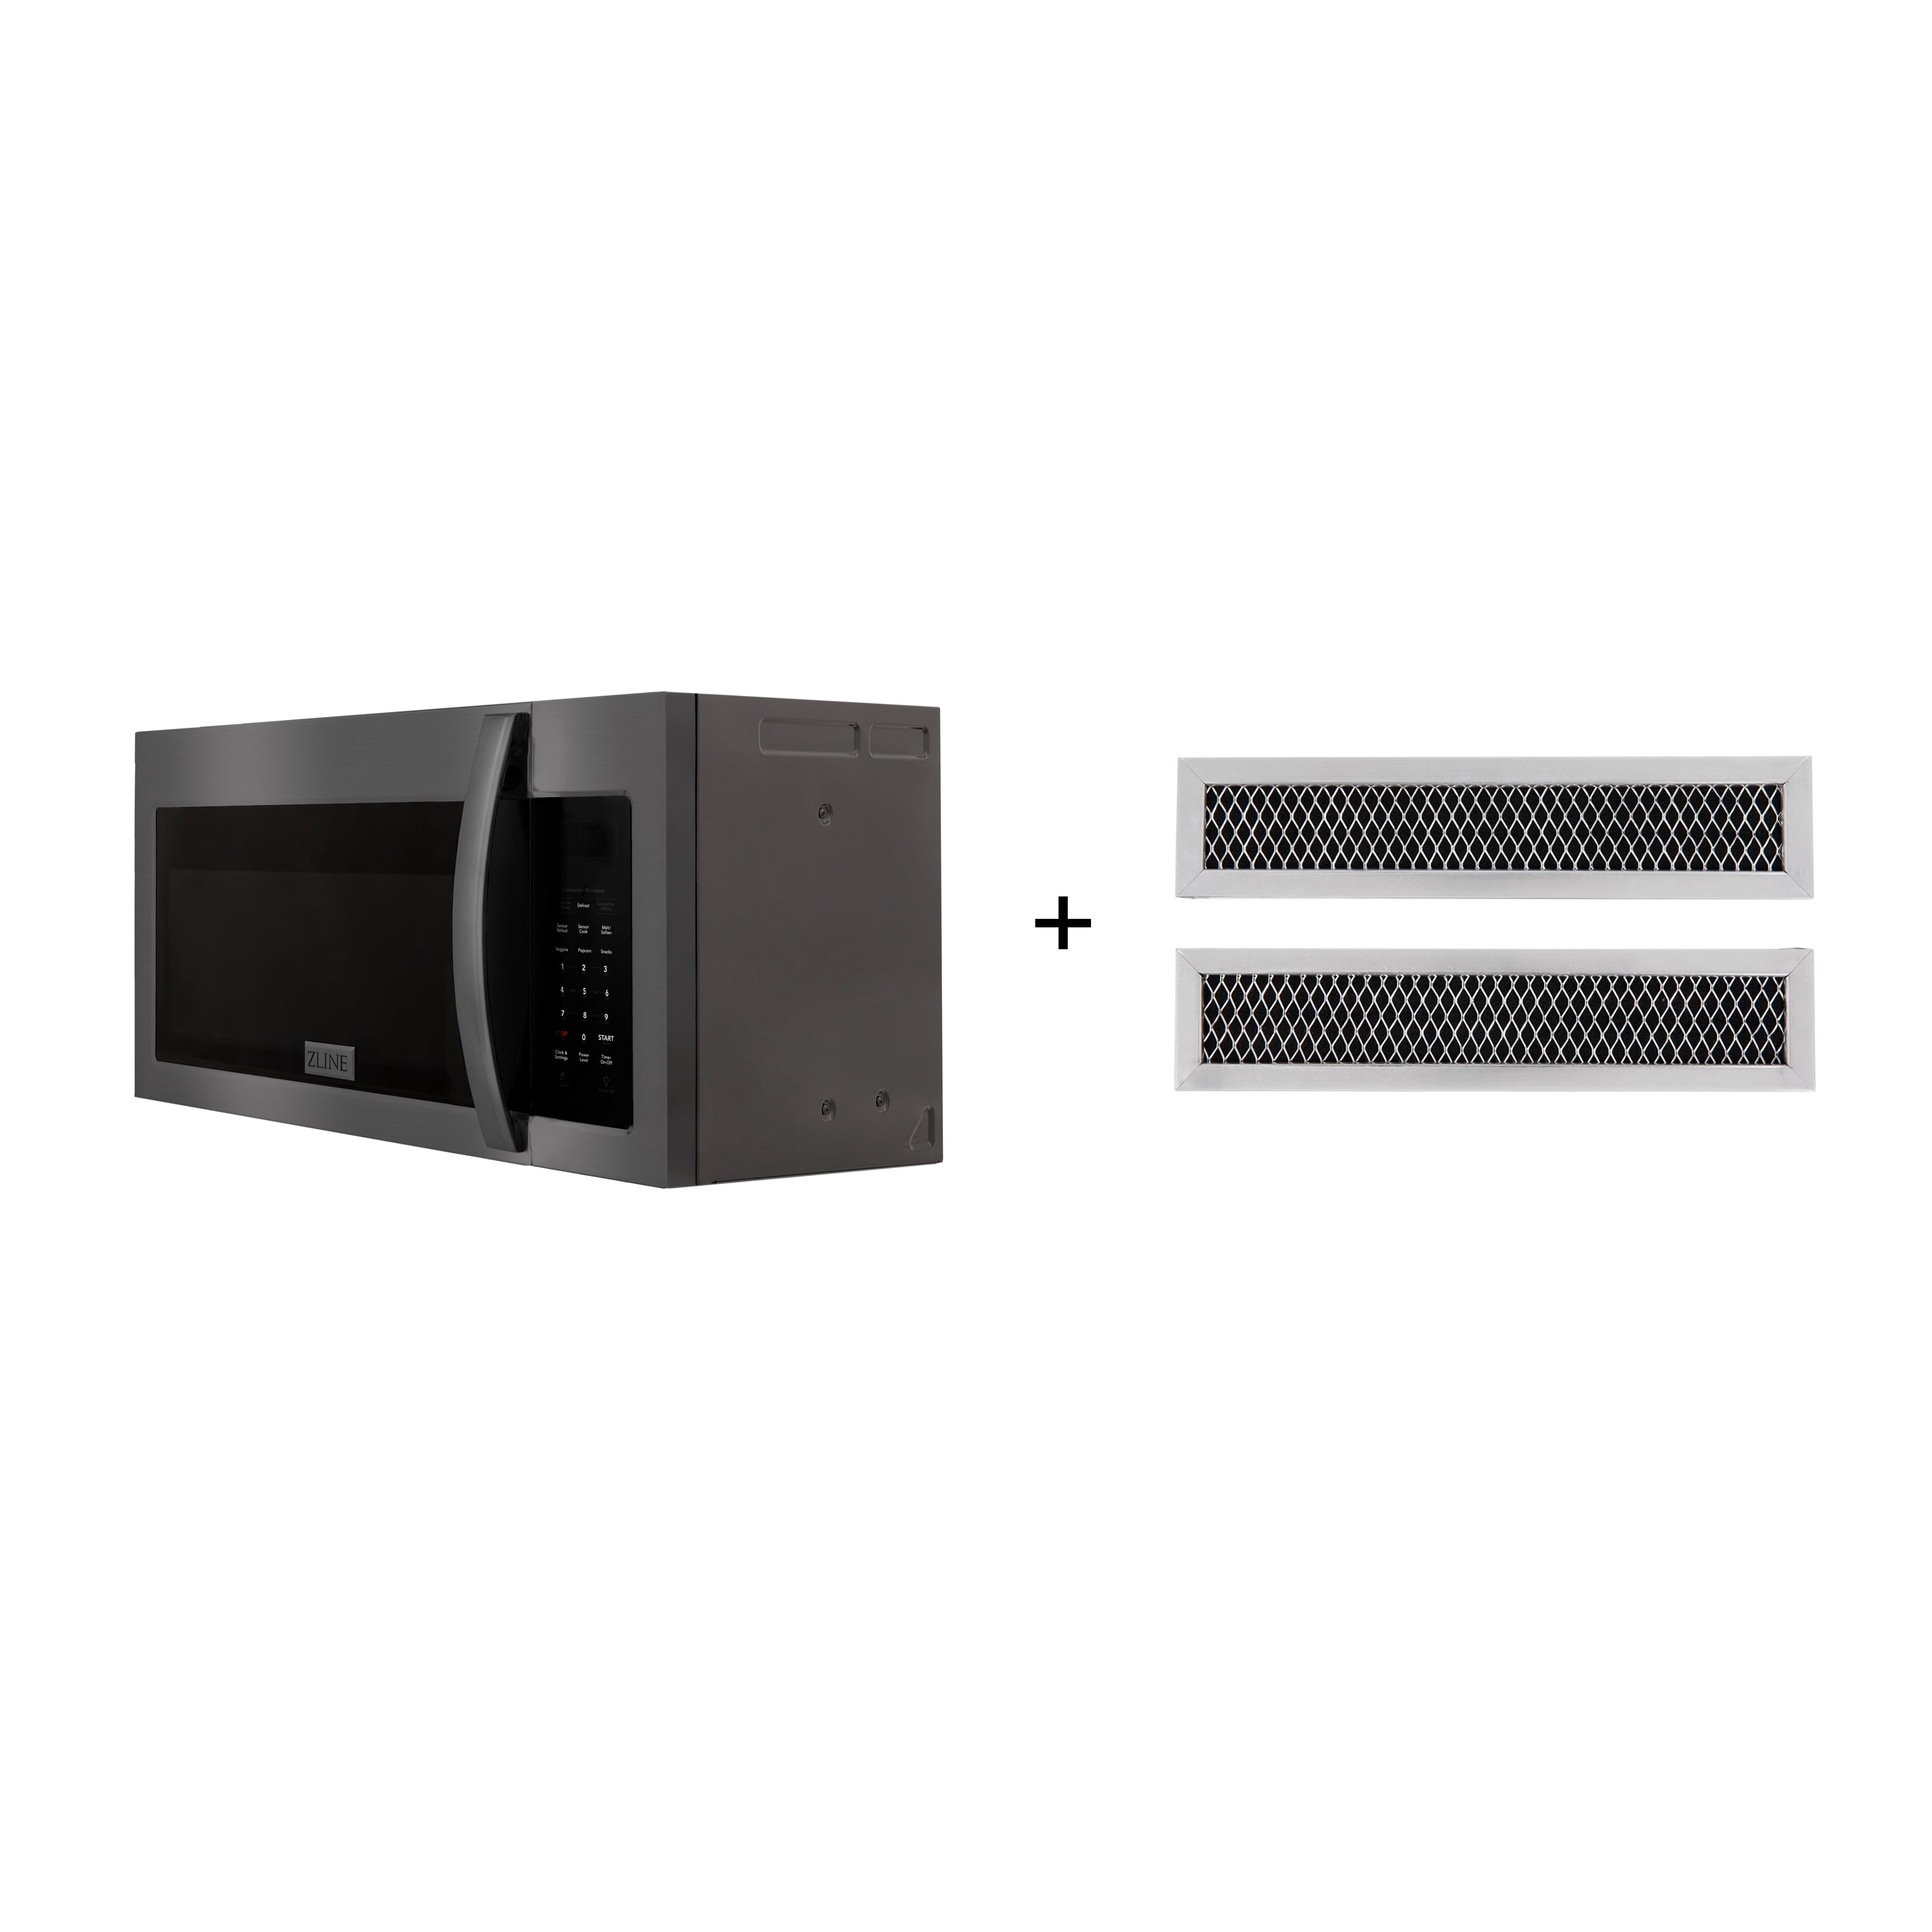 ZLINE Recirculating Over the Range Convection Microwave Oven with Charcoal Filters in Black Stainless Steel (MWO-OTRCF-30-BS)